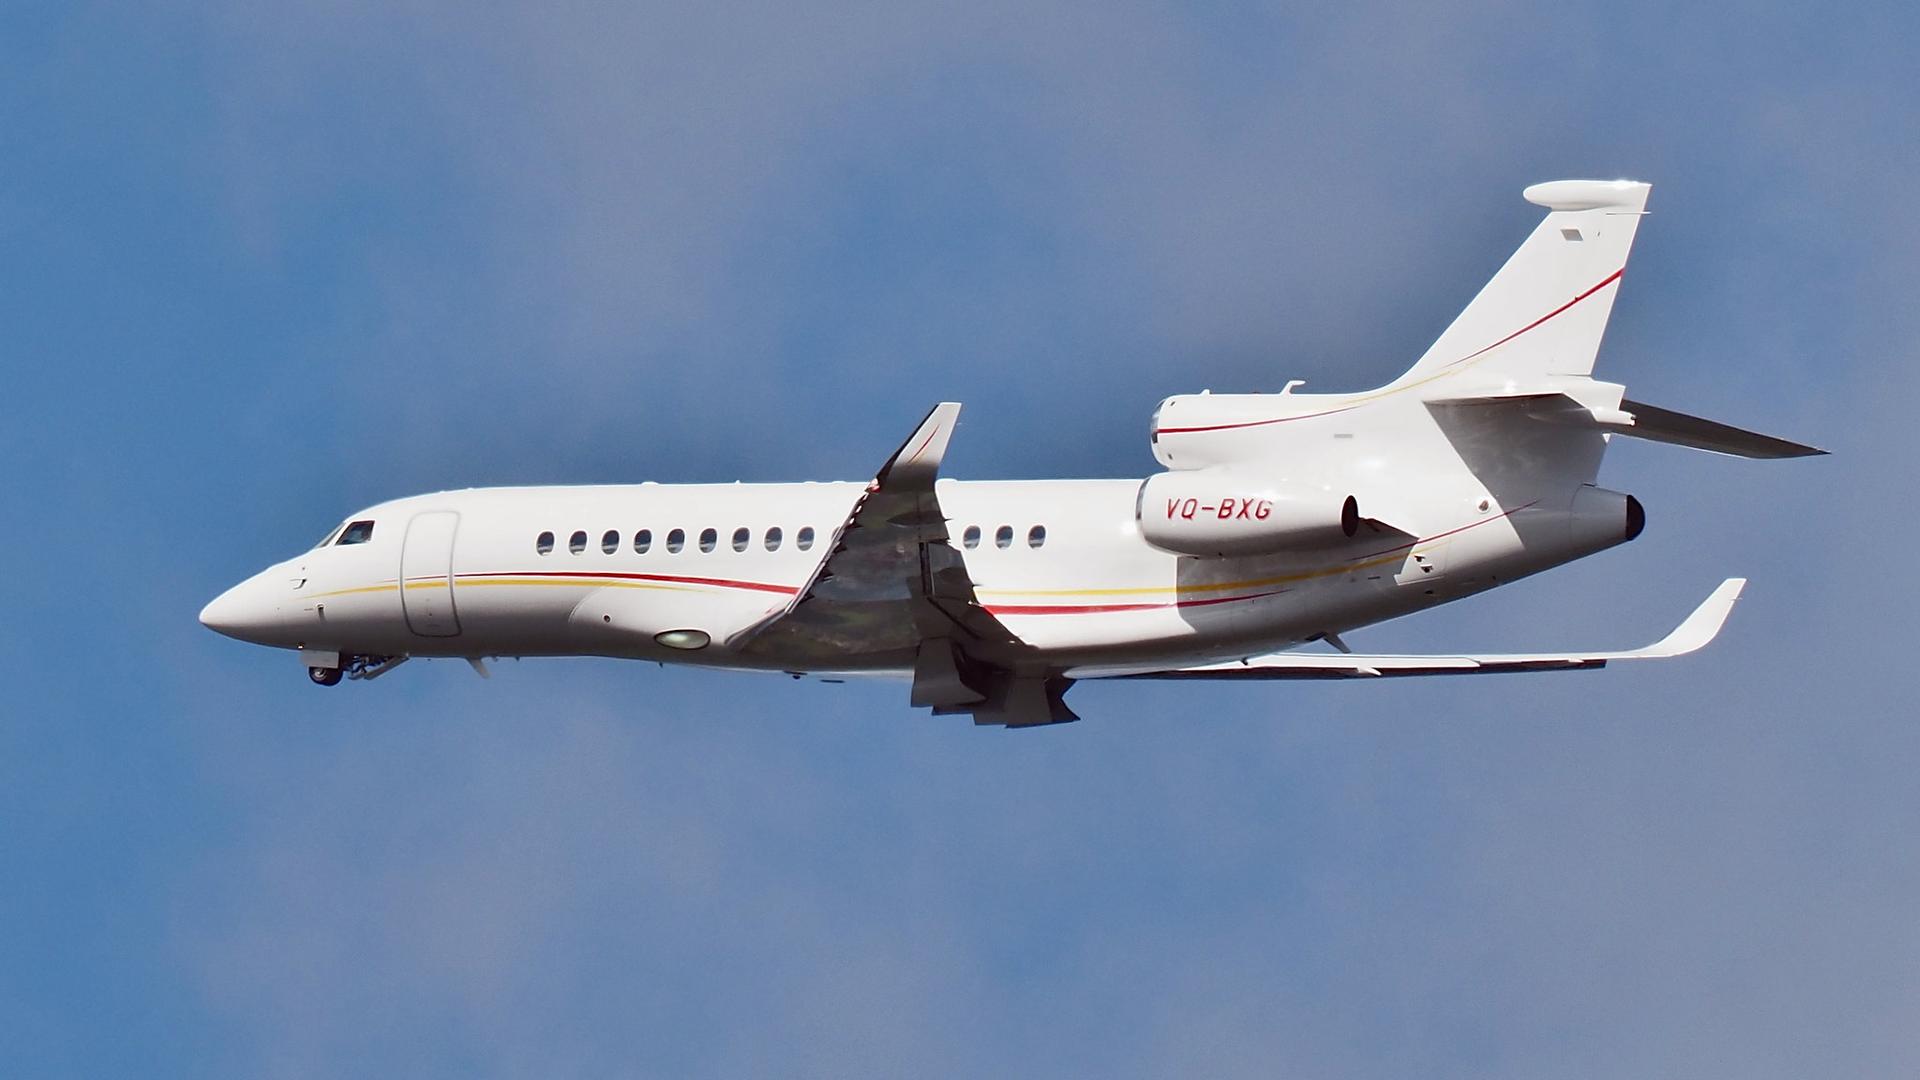 A white Dassault Falcon 8X with red and yellow accents sporting tail number VQ-BXG.